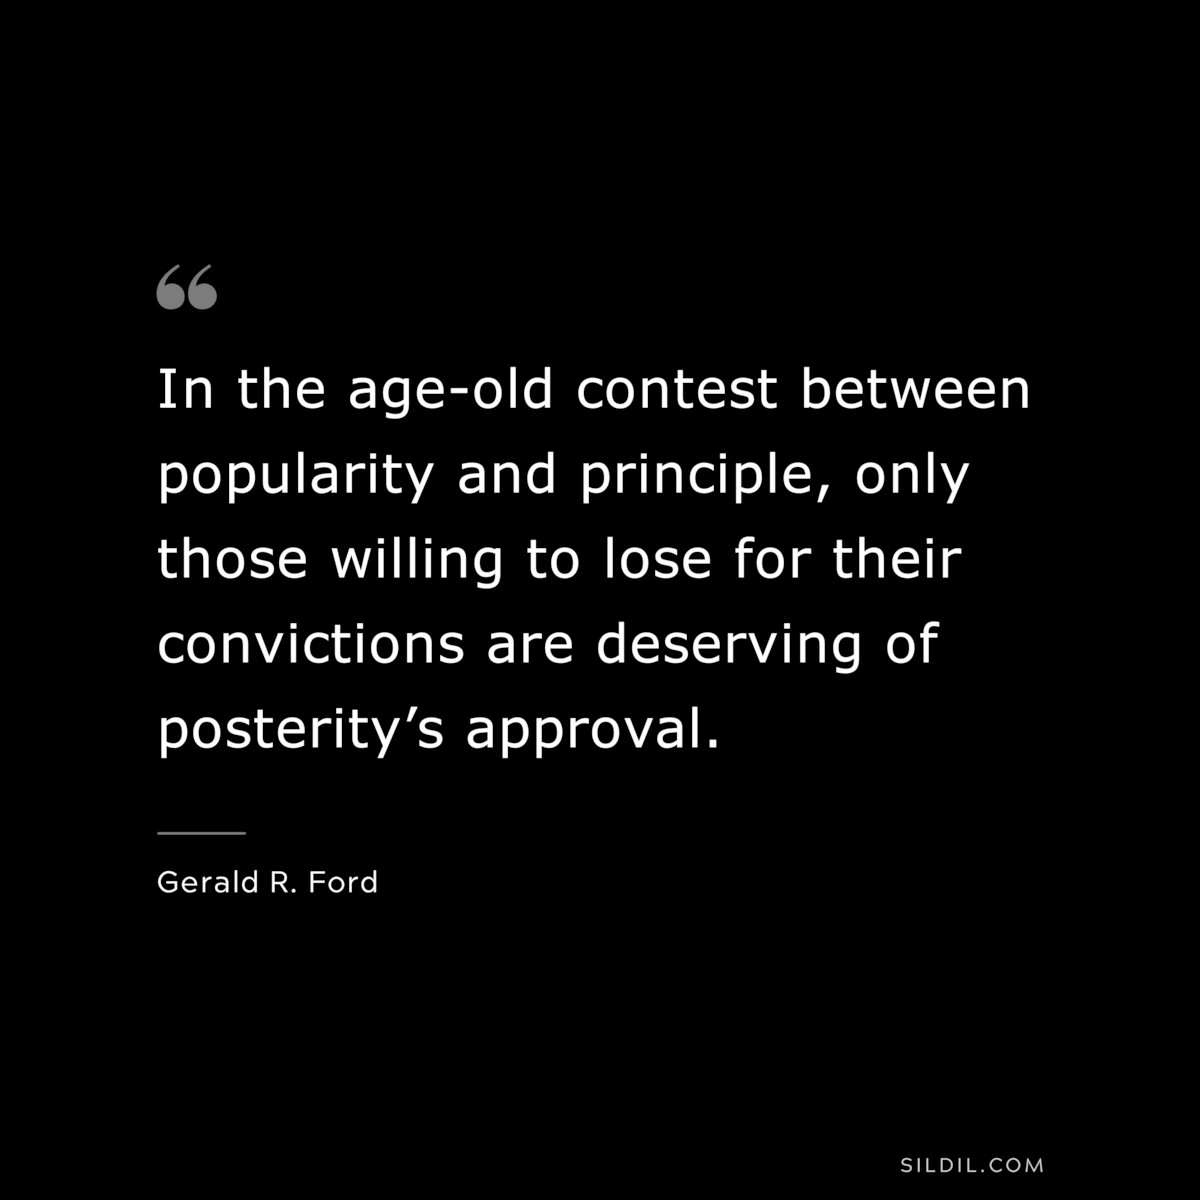 In the age-old contest between popularity and principle, only those willing to lose for their convictions are deserving of posterity’s approval. ― Gerald R. Ford